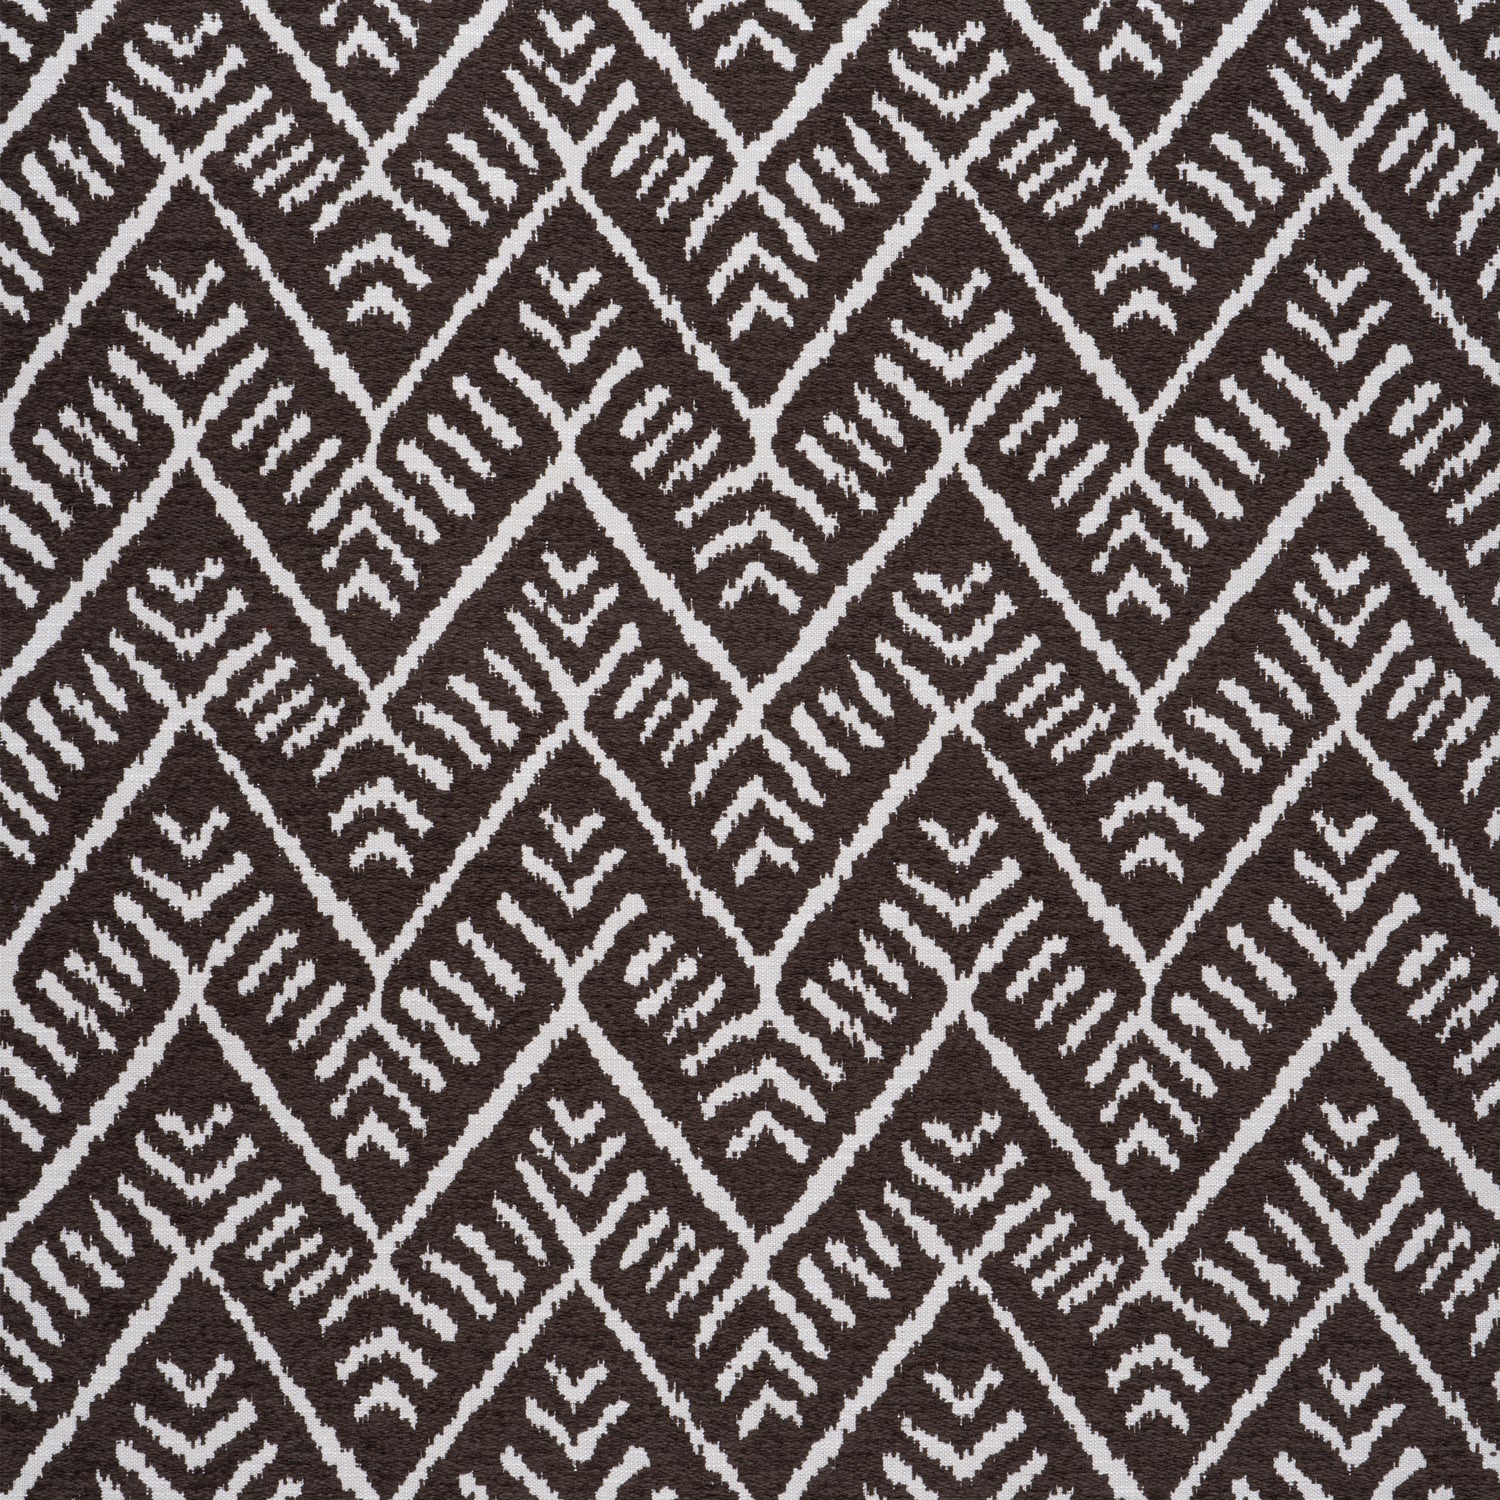 Tahoe fabric in bark color - pattern number W78356 - by Thibaut in the  Sierra collection